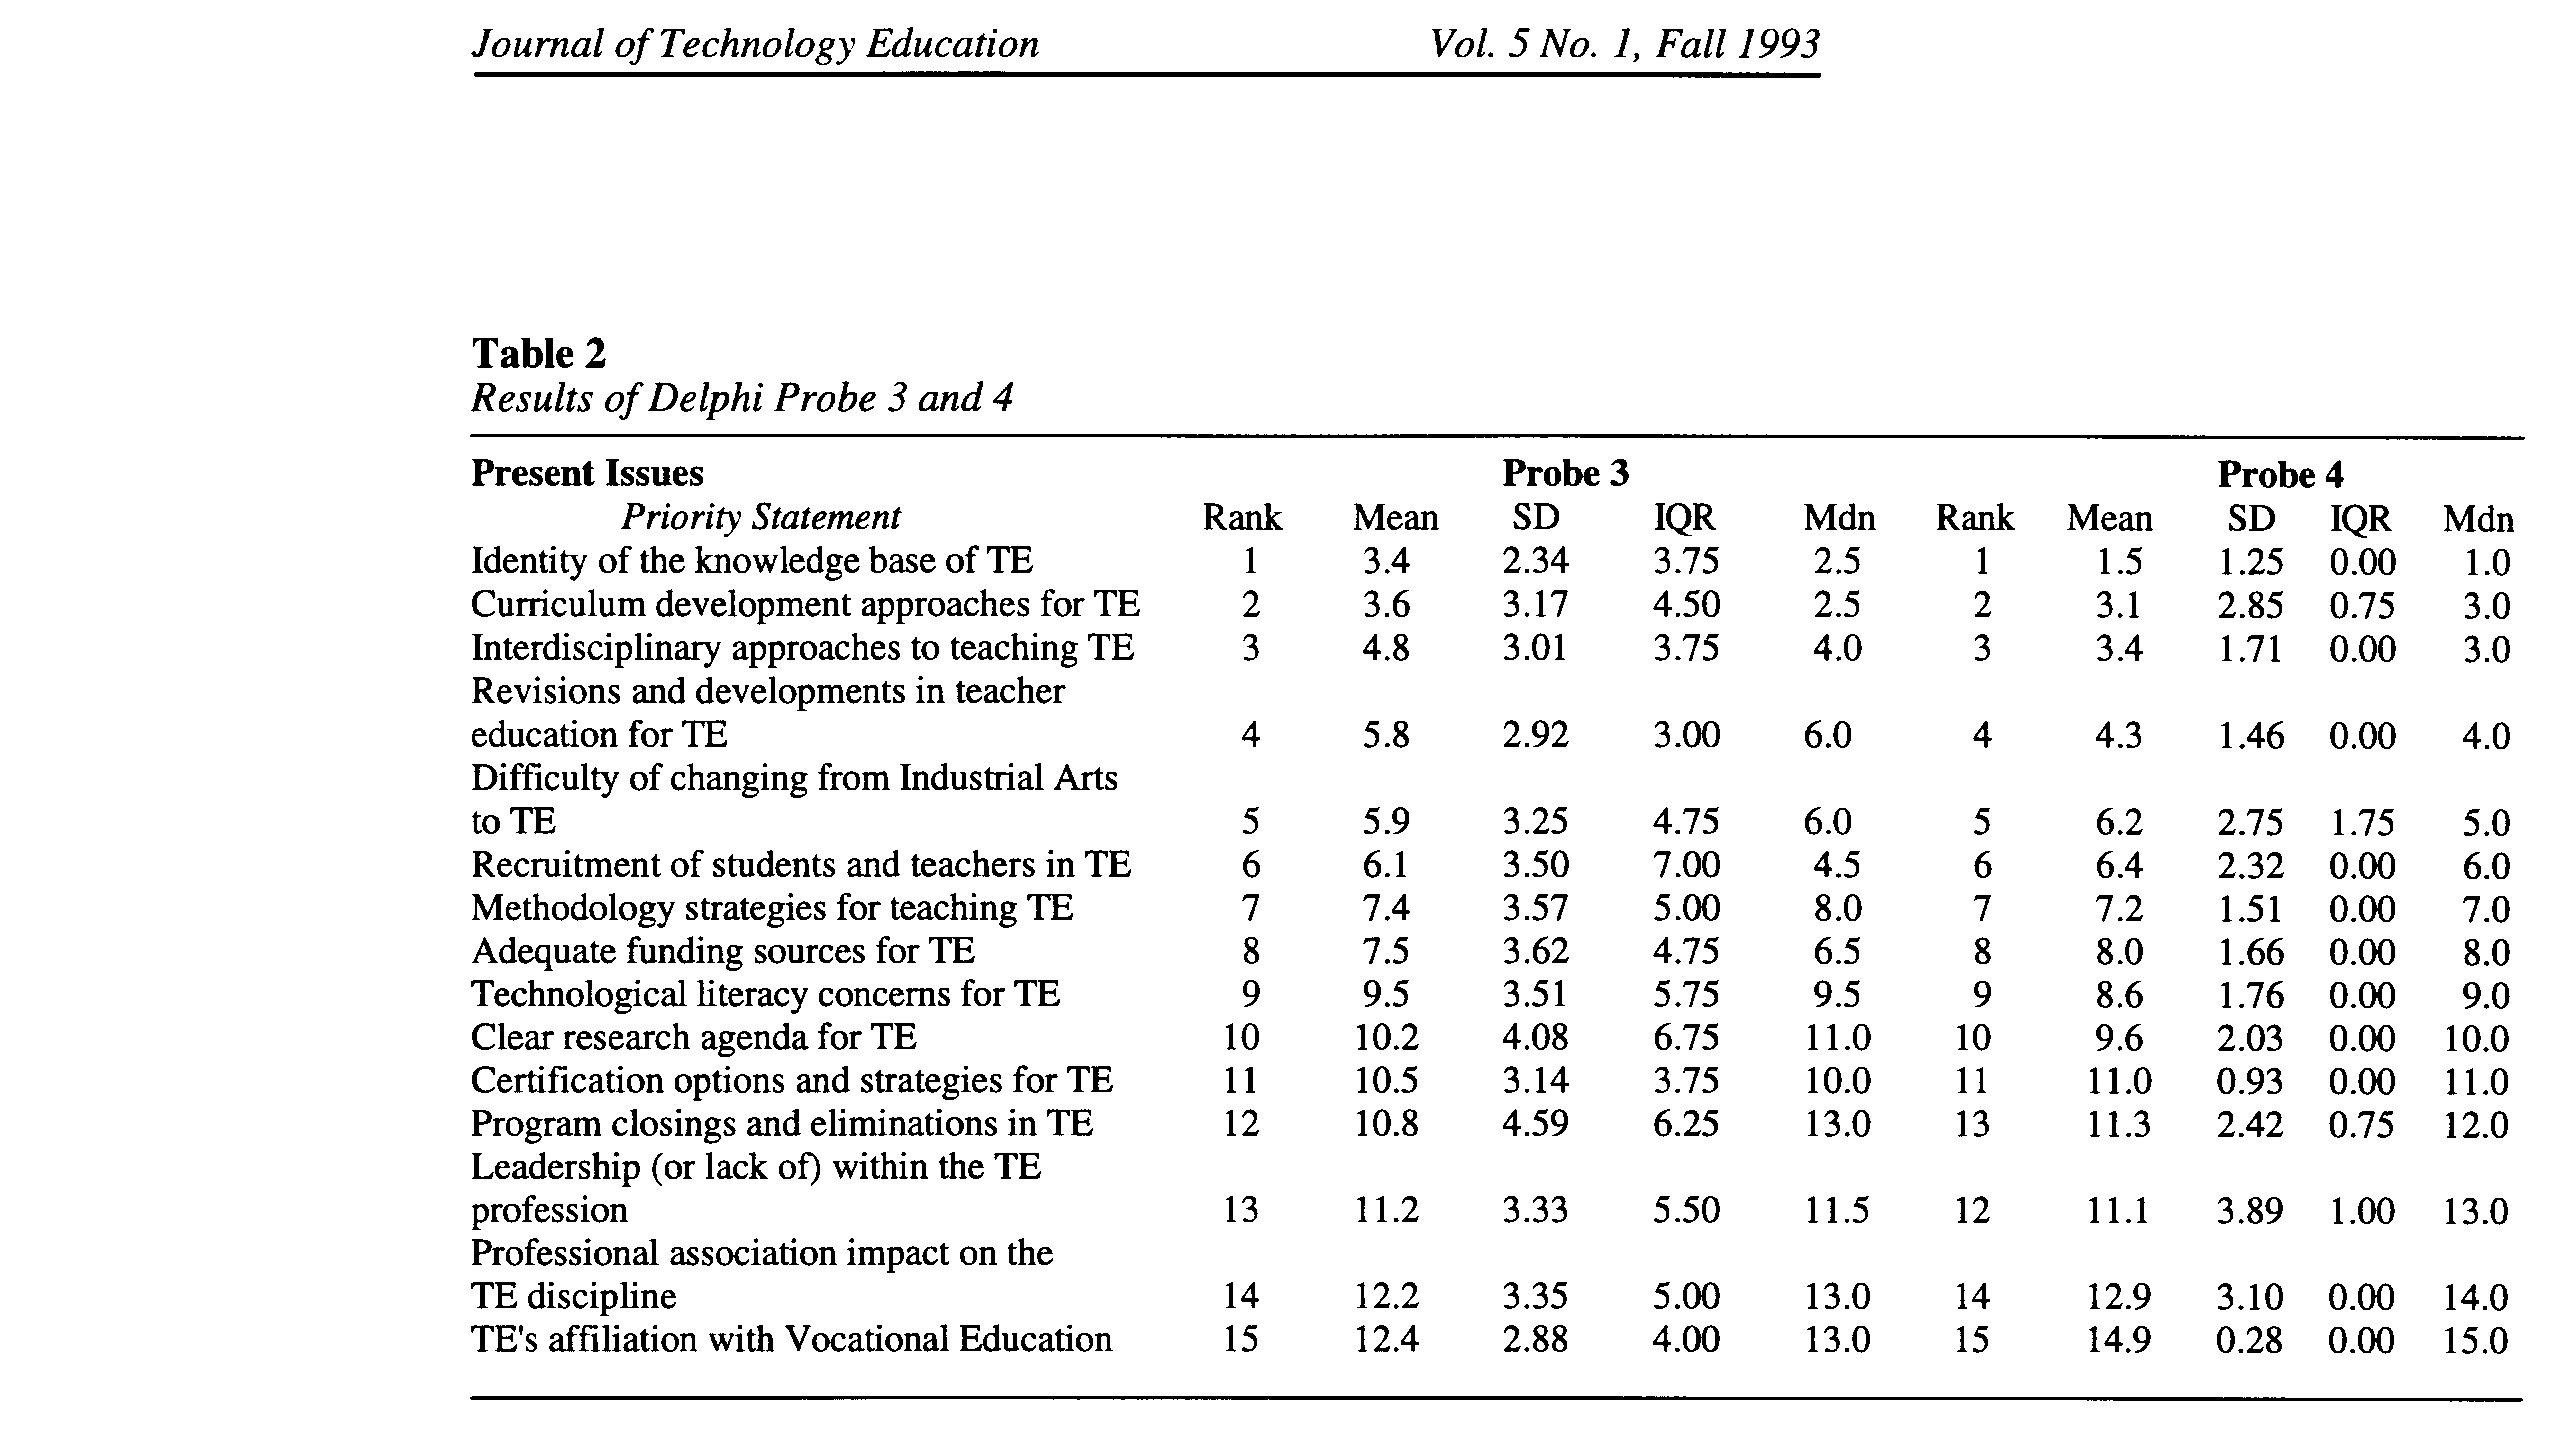 Table 2. Results of Delphi Probe 3 and 4